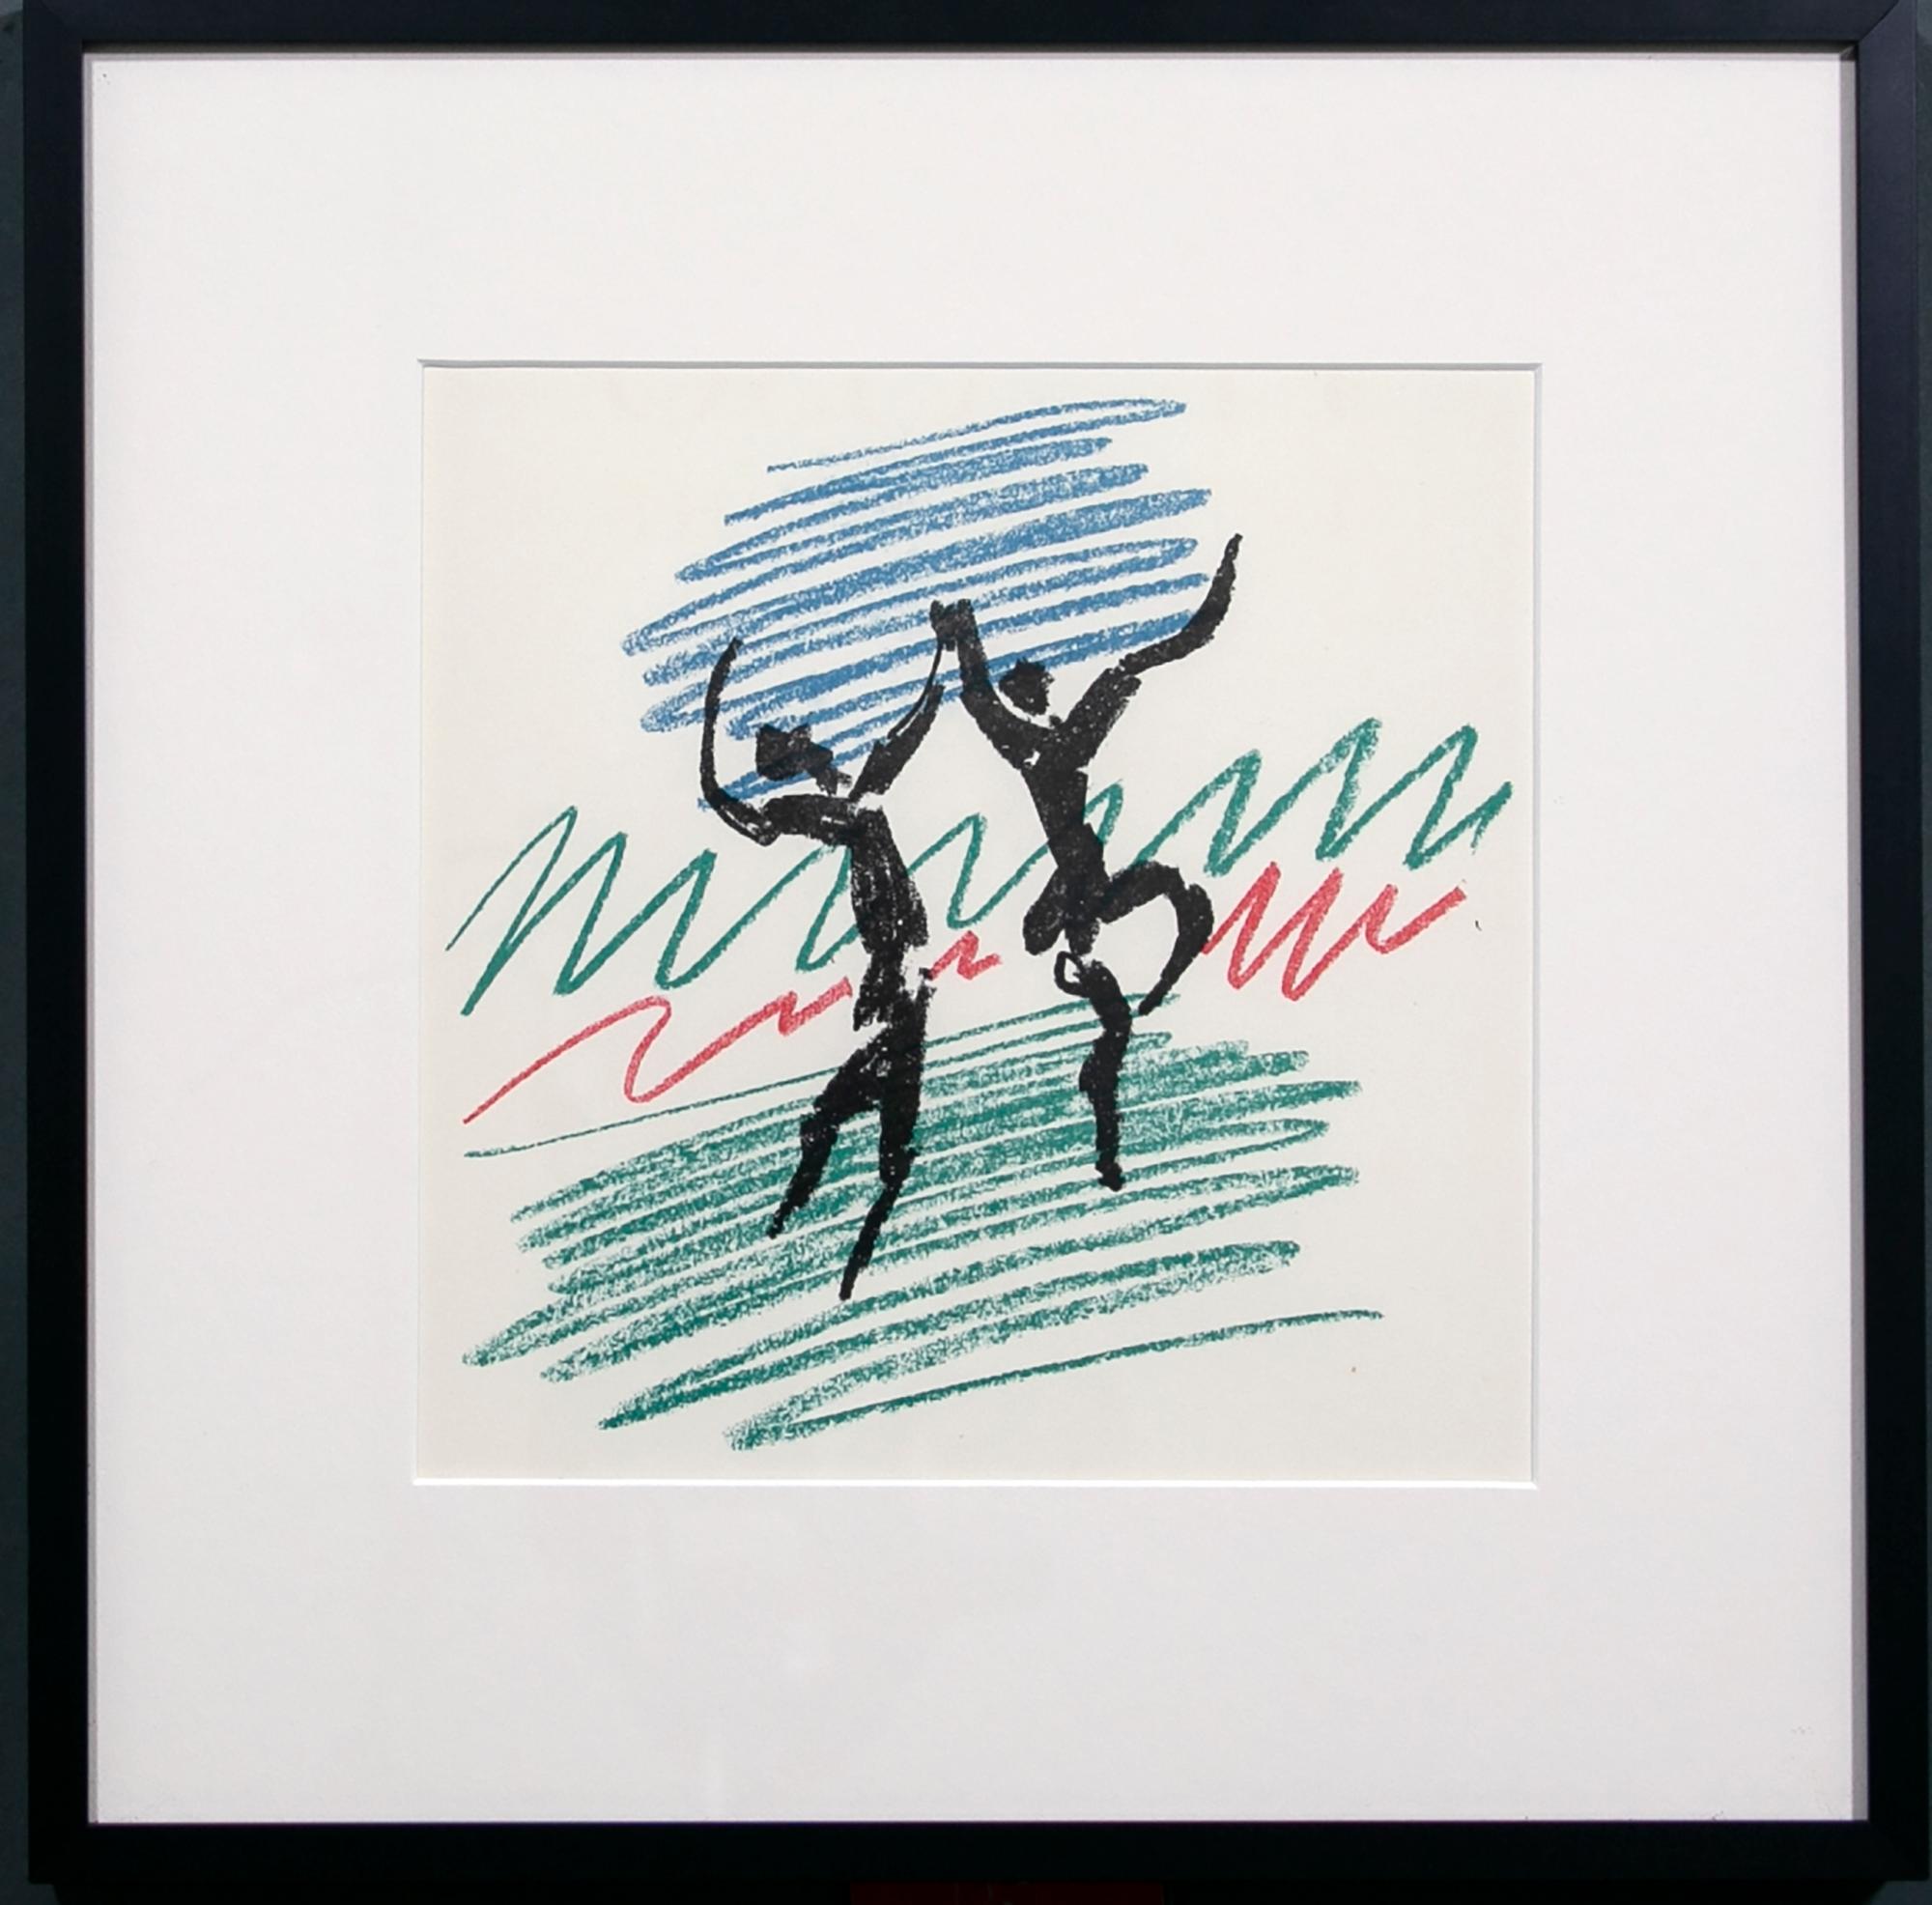 Pablo Picasso Abstract Drawing - La Danse: Frontispiece for Tome III of Picasso Lithographs